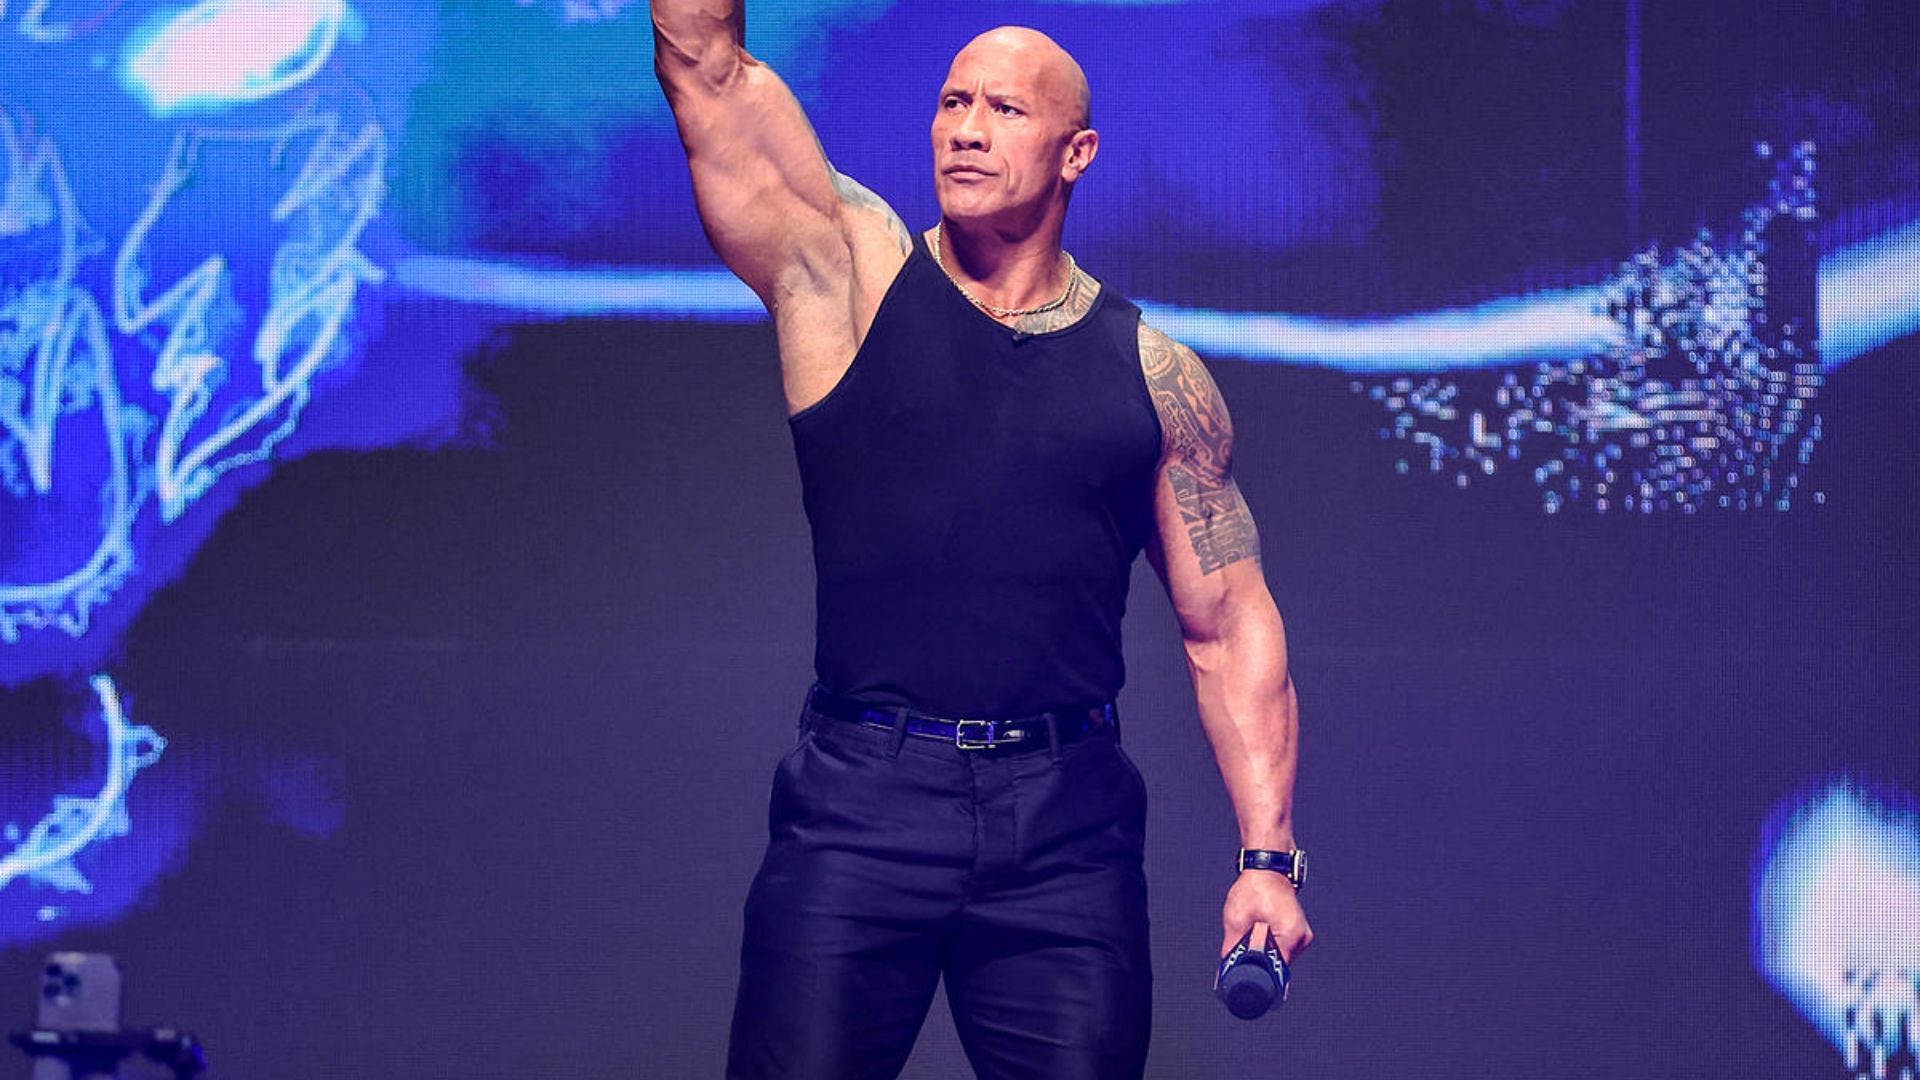 The Rock is scheduled to appear on this week